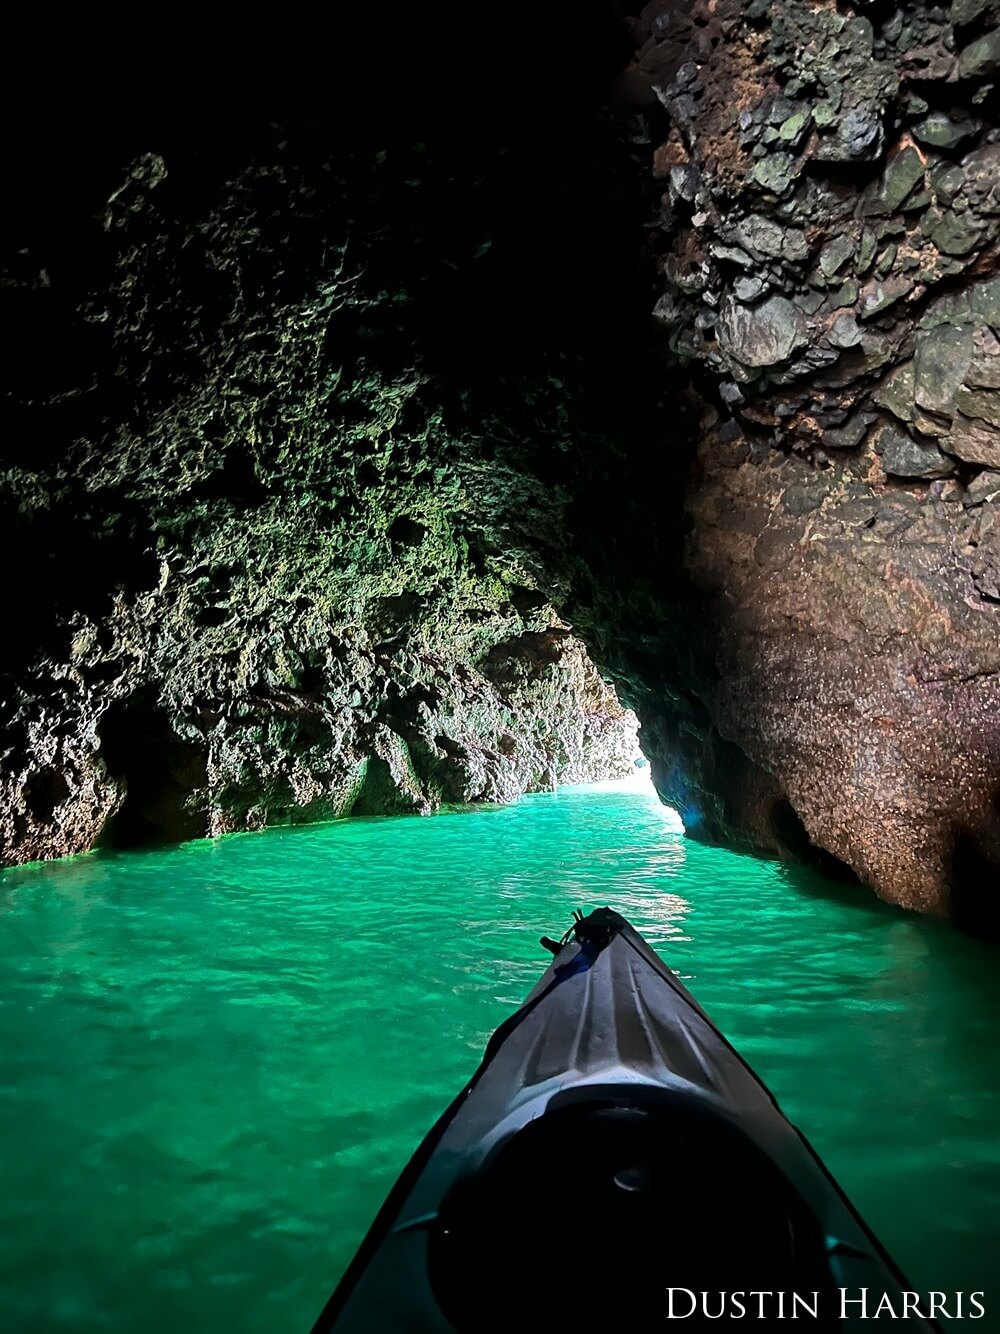 POV photo from a kayak in a cave surrounded by green water.